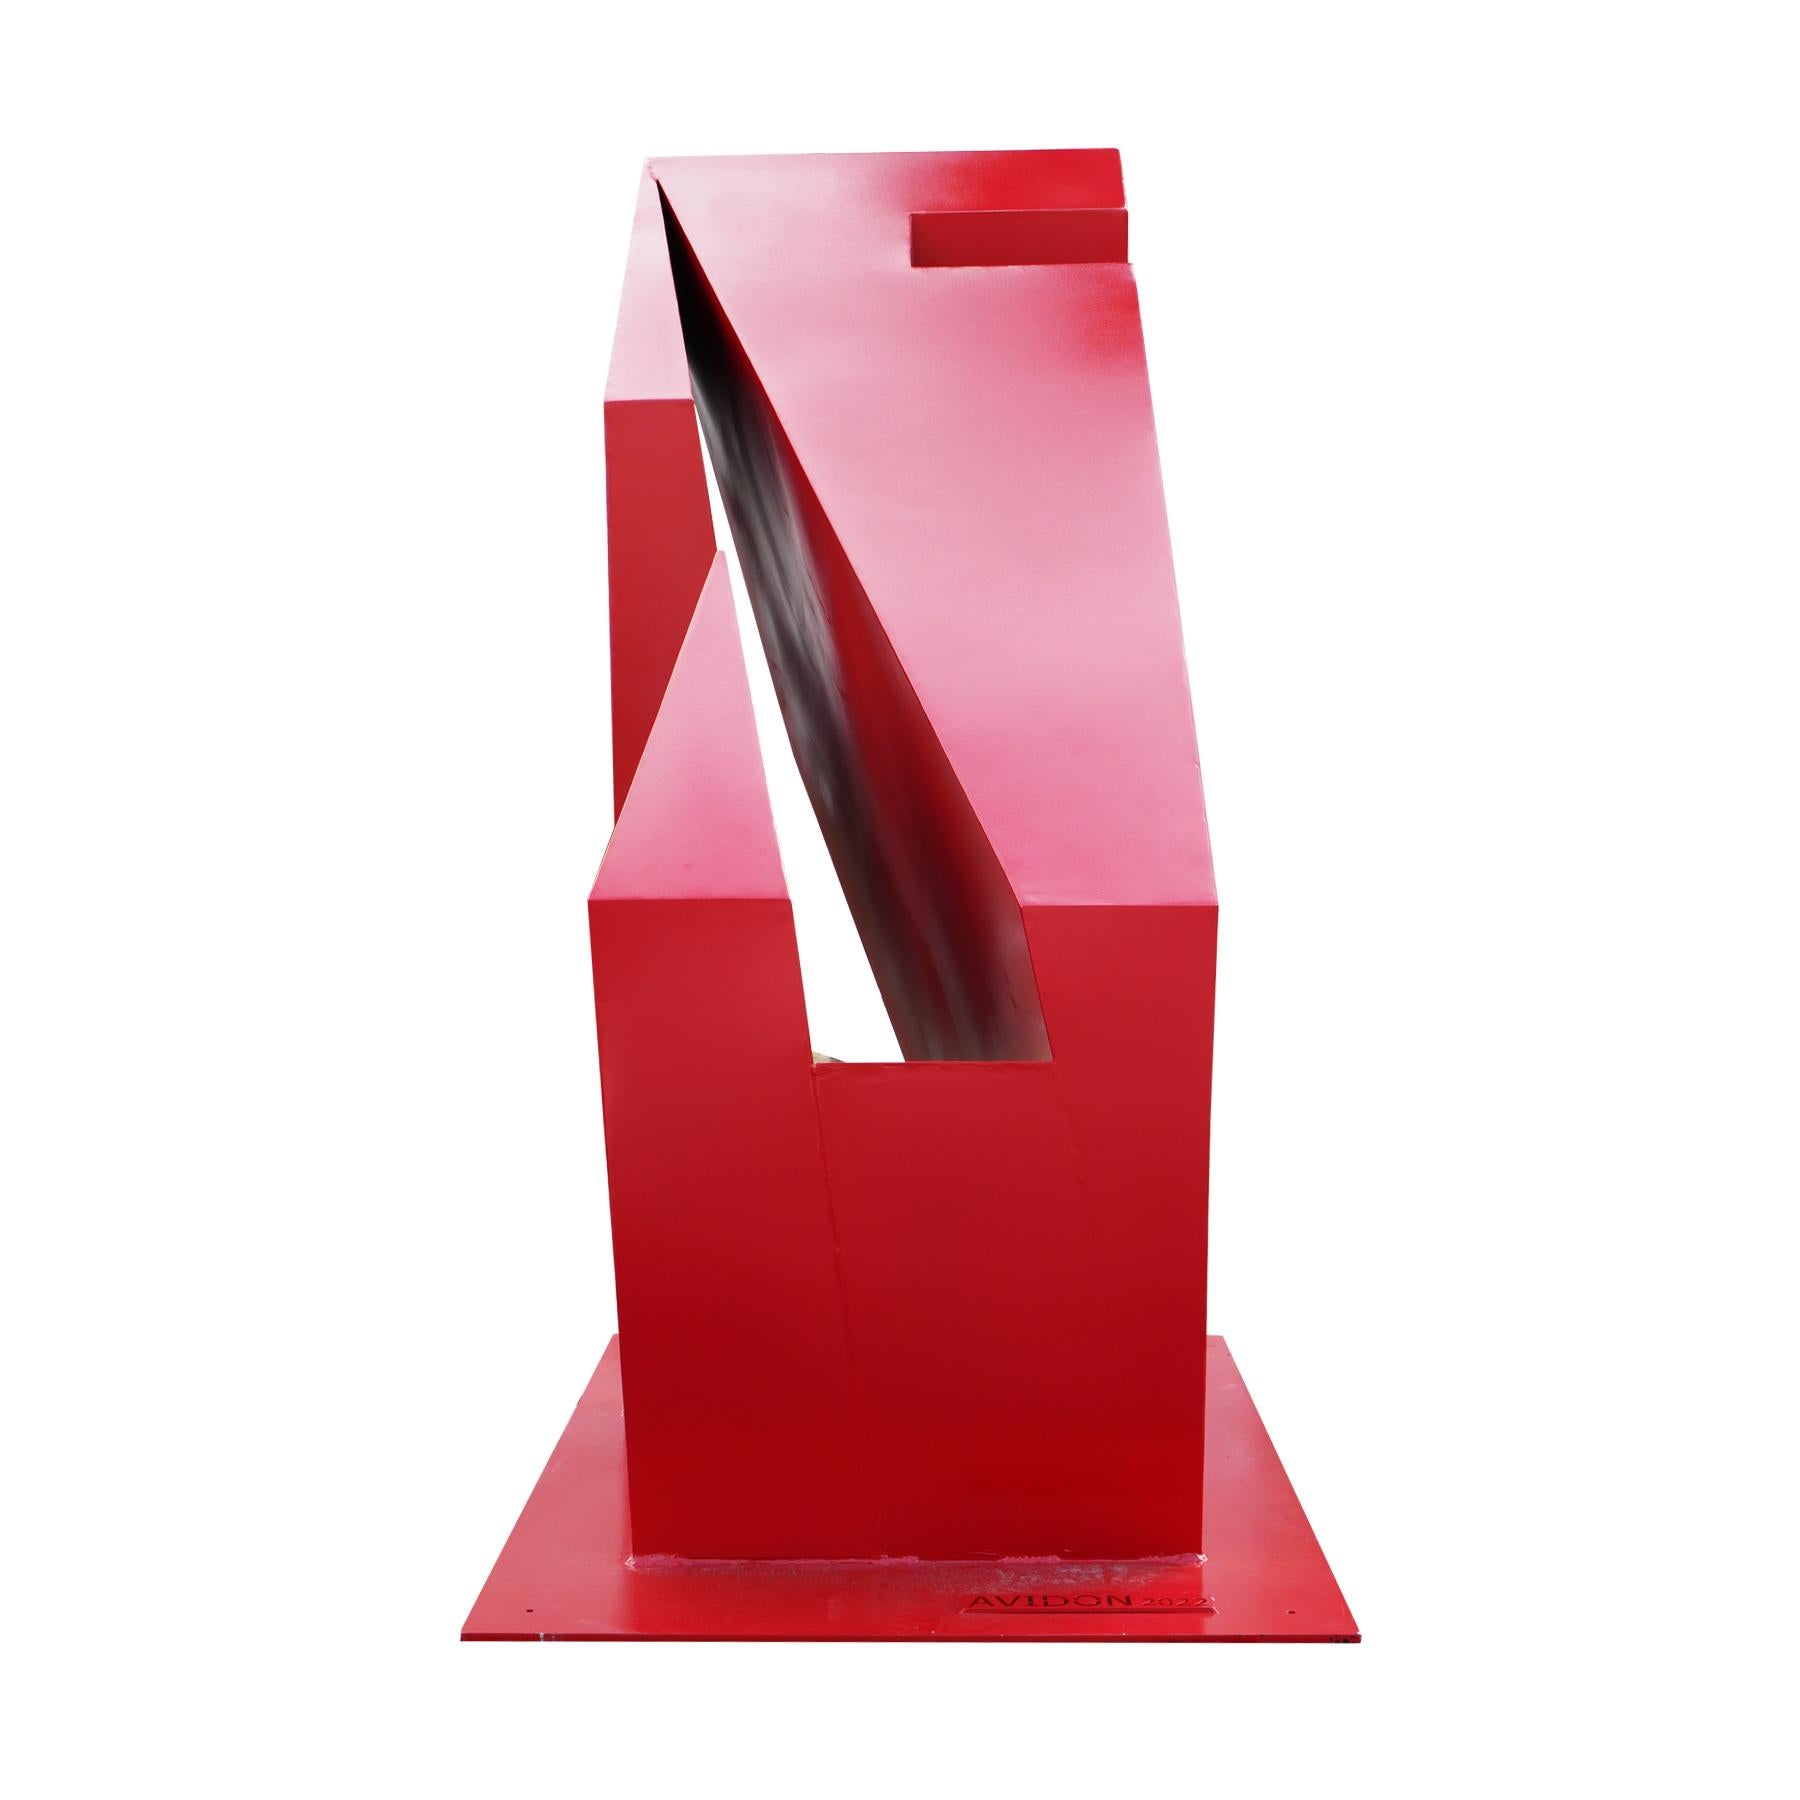 Large Contemporary Geometric Red Outdoor Sculpture  For Sale 4